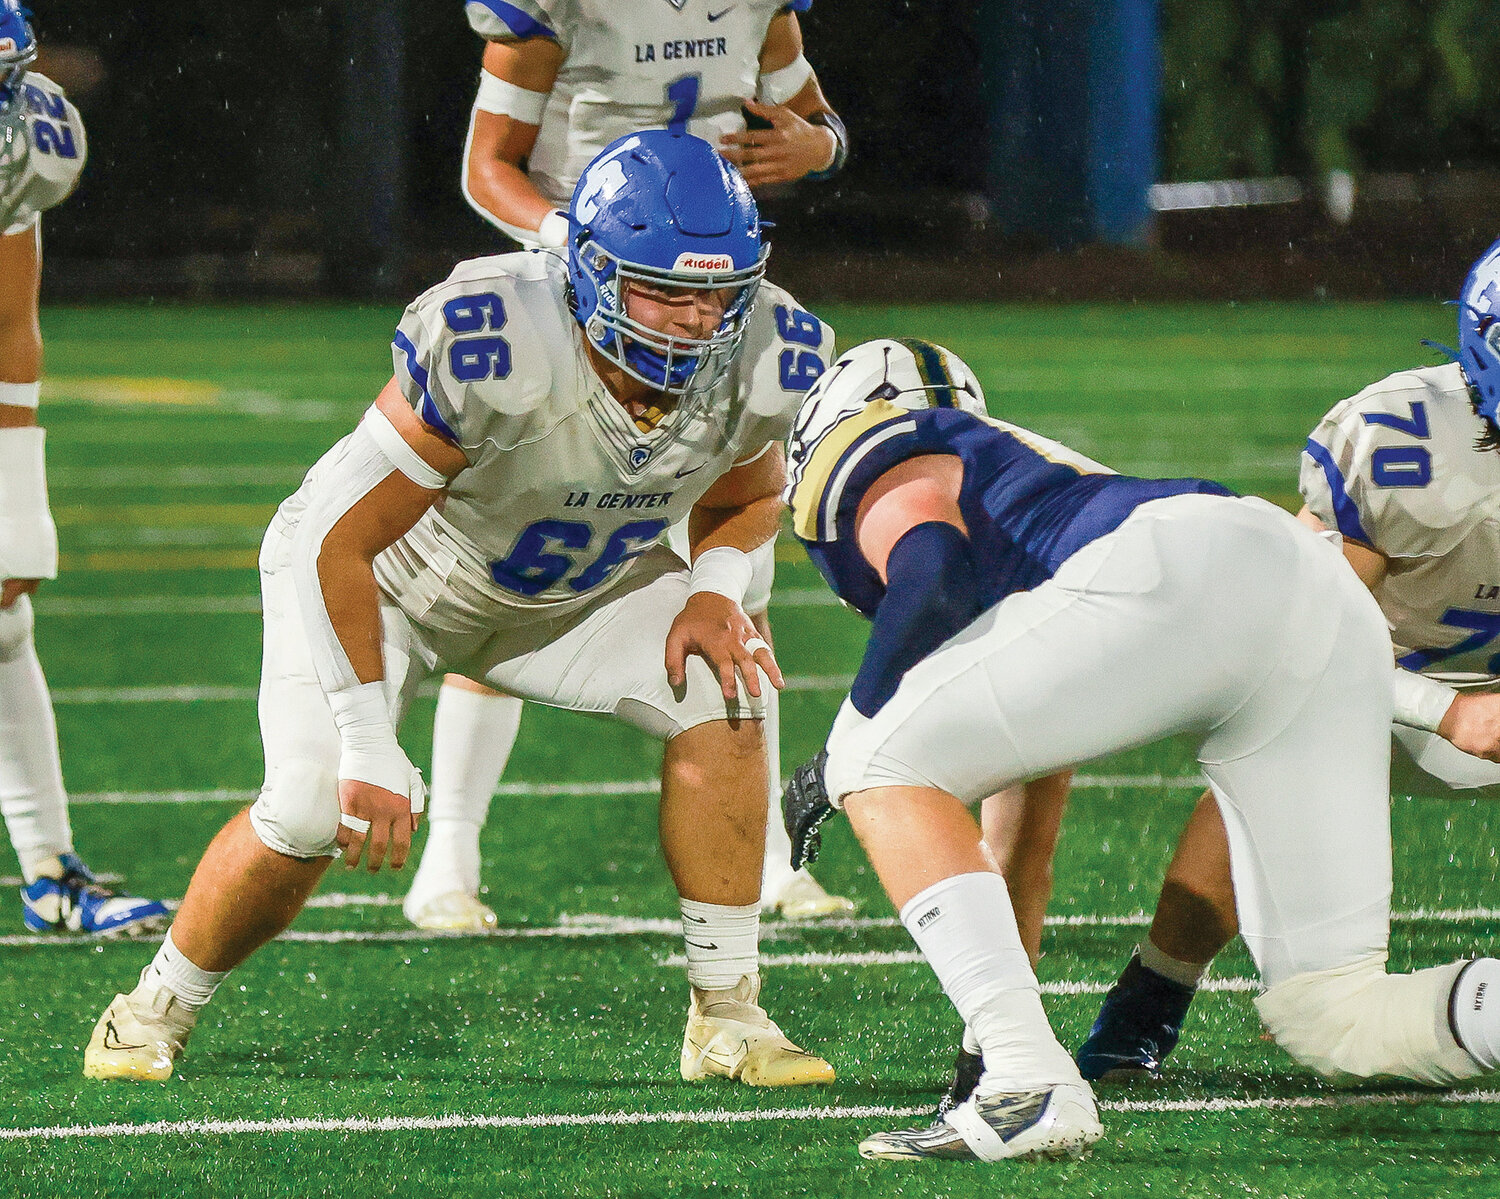 La Center’s Ryan Kawalek earned lineman of the year in the 1A Trico League’s football honors.